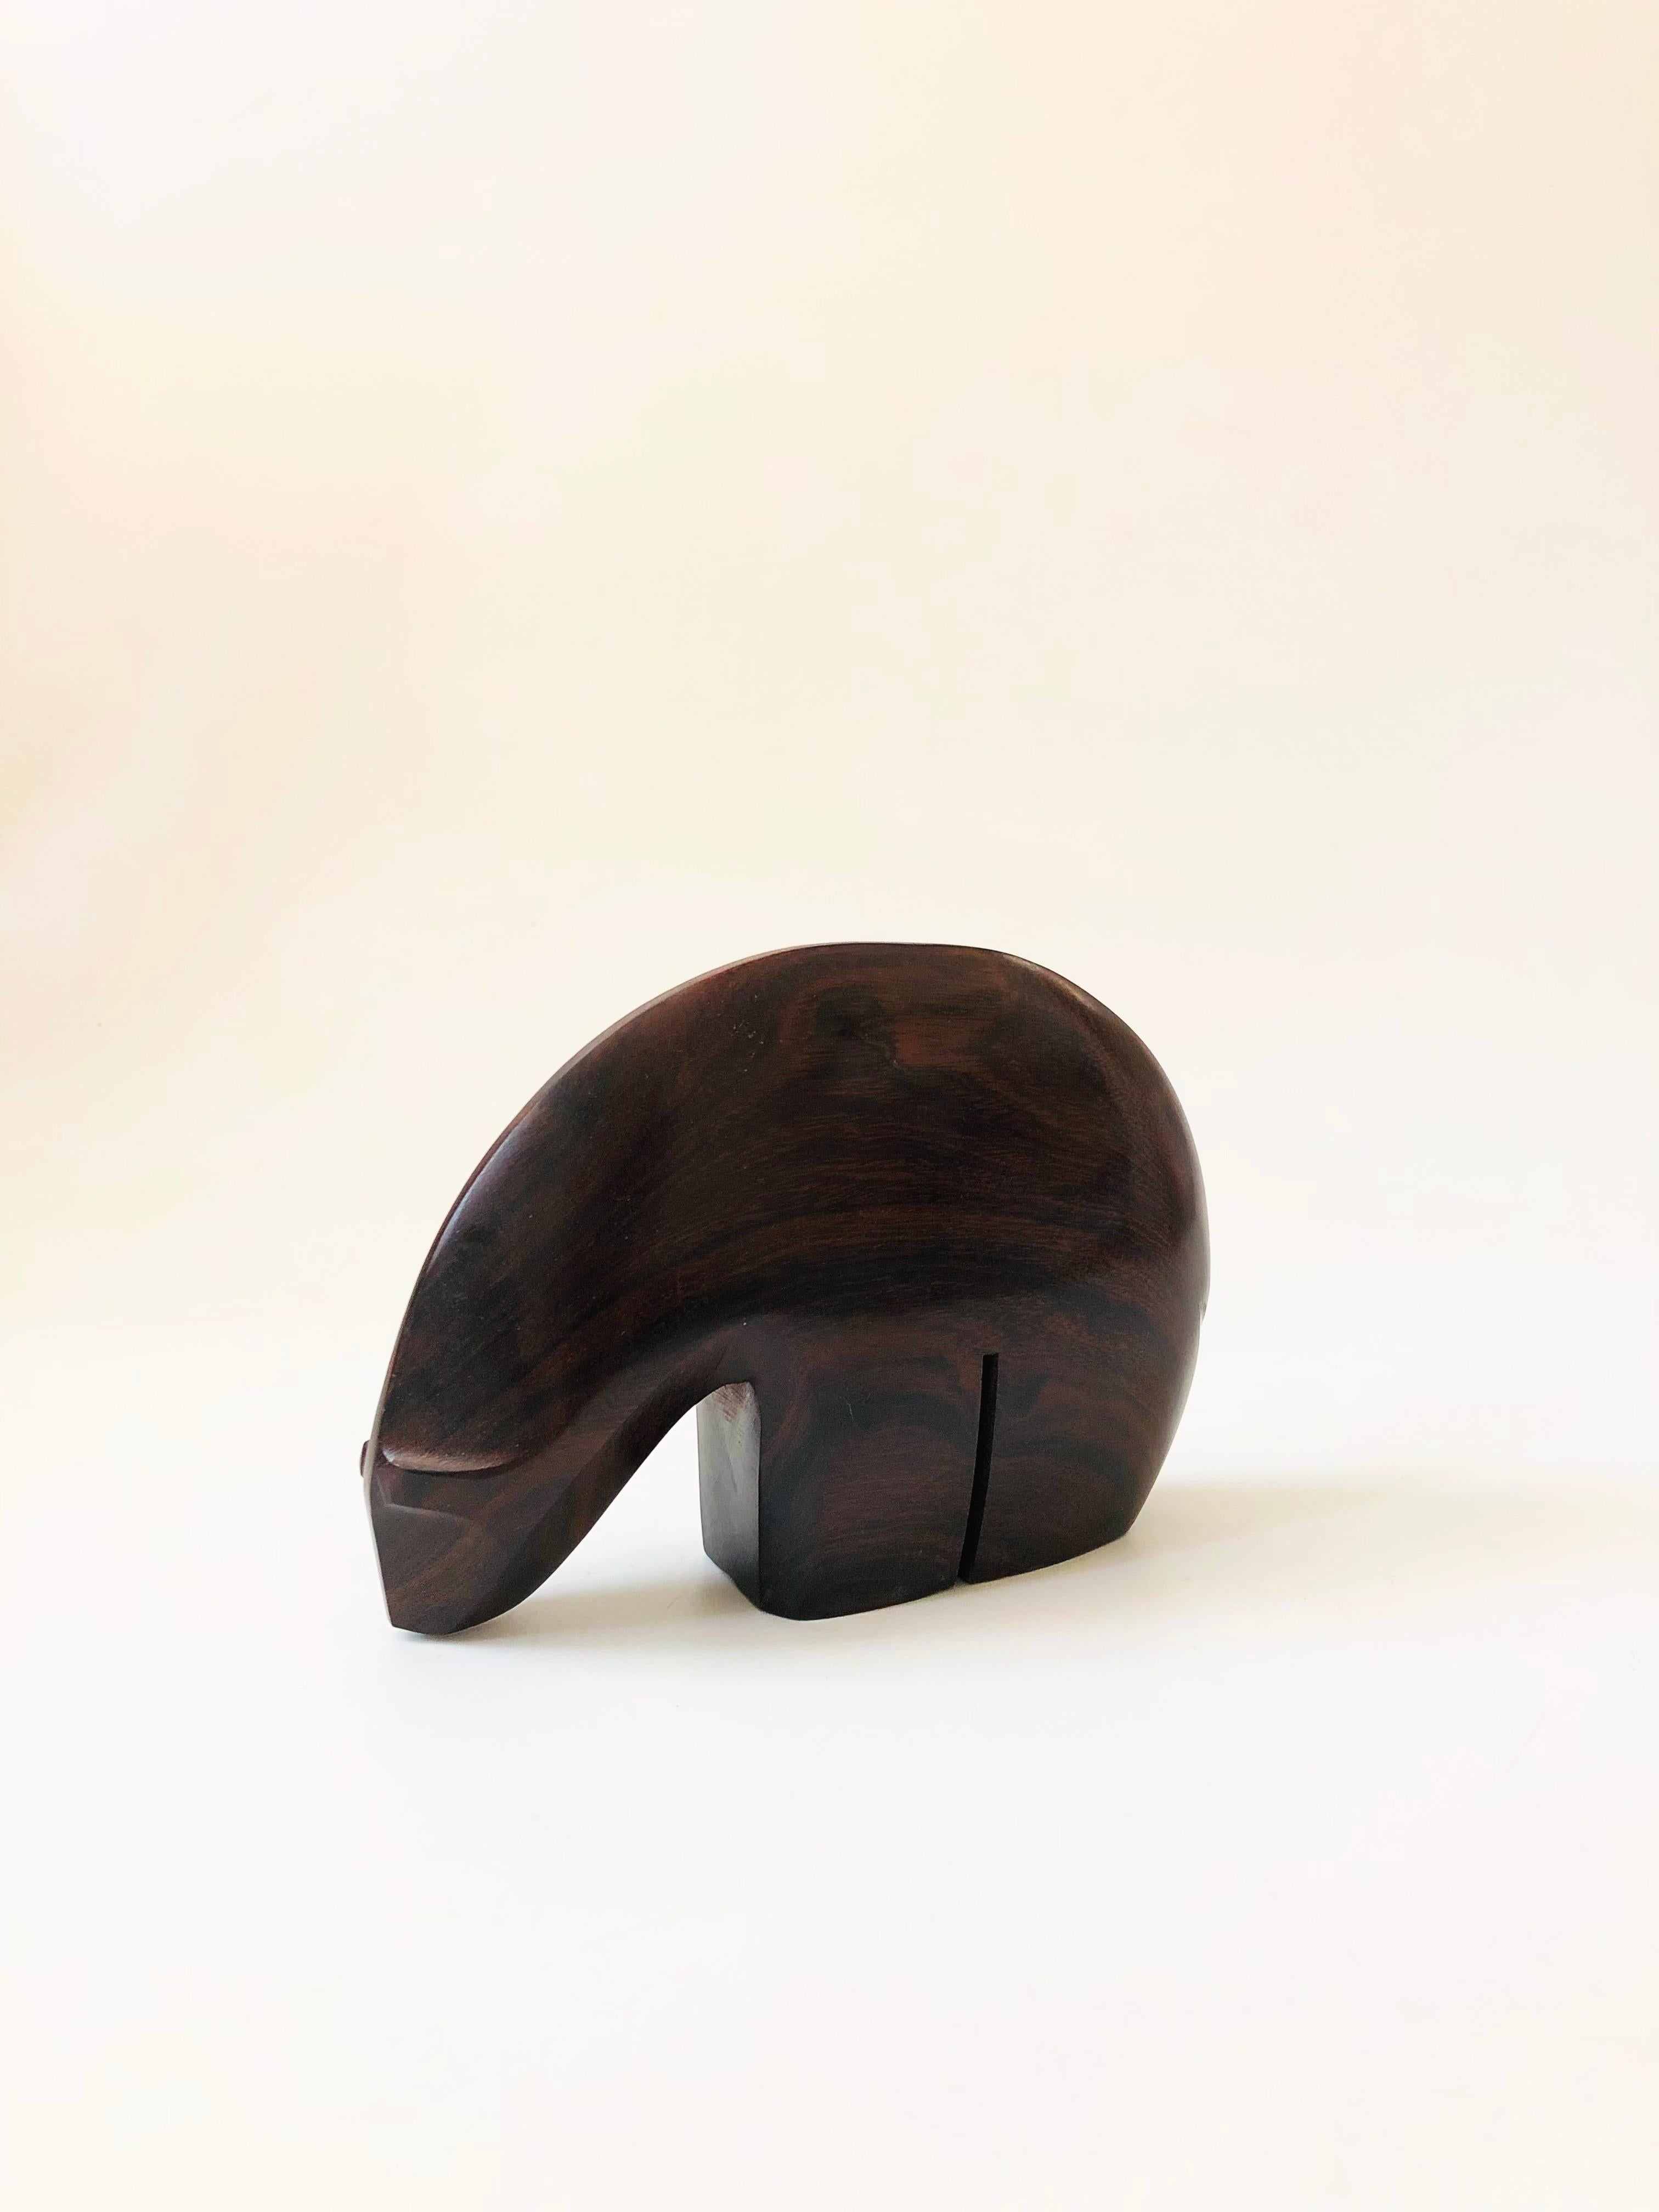 A vintage carved ironwood polar bear. Great simplified modernist form with a lovely dark natural grain and smooth finish to the wood.

